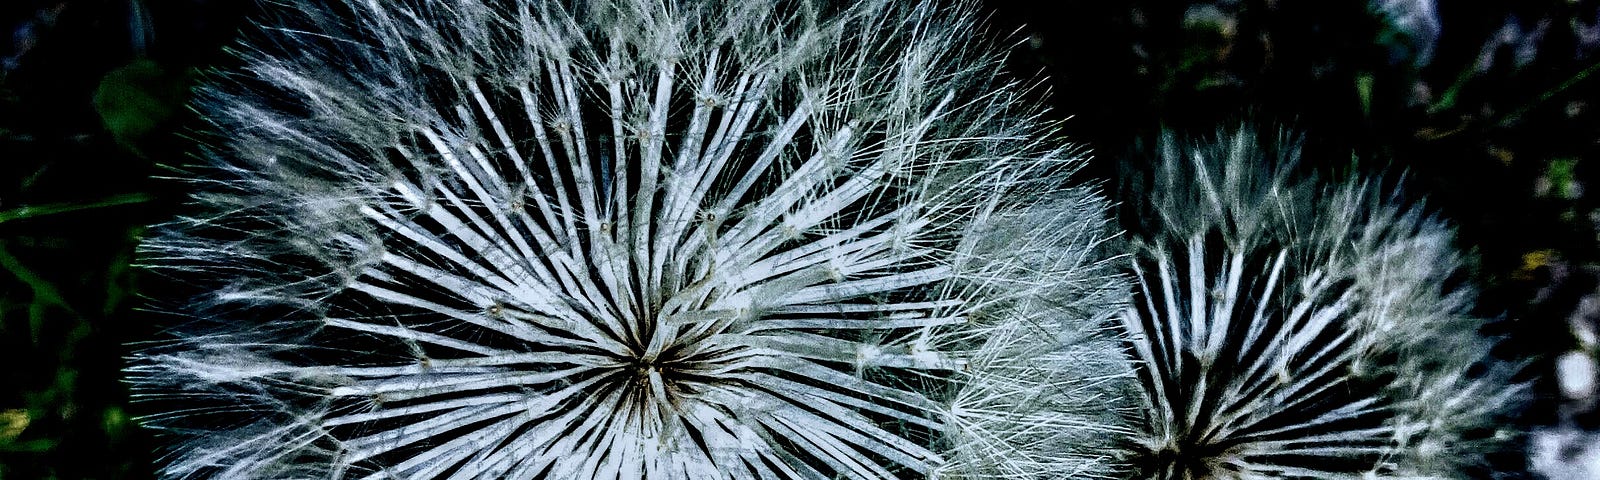 Two Dandelions in white sliver light, background dark mit green and violent spots. Nonduality means not two.